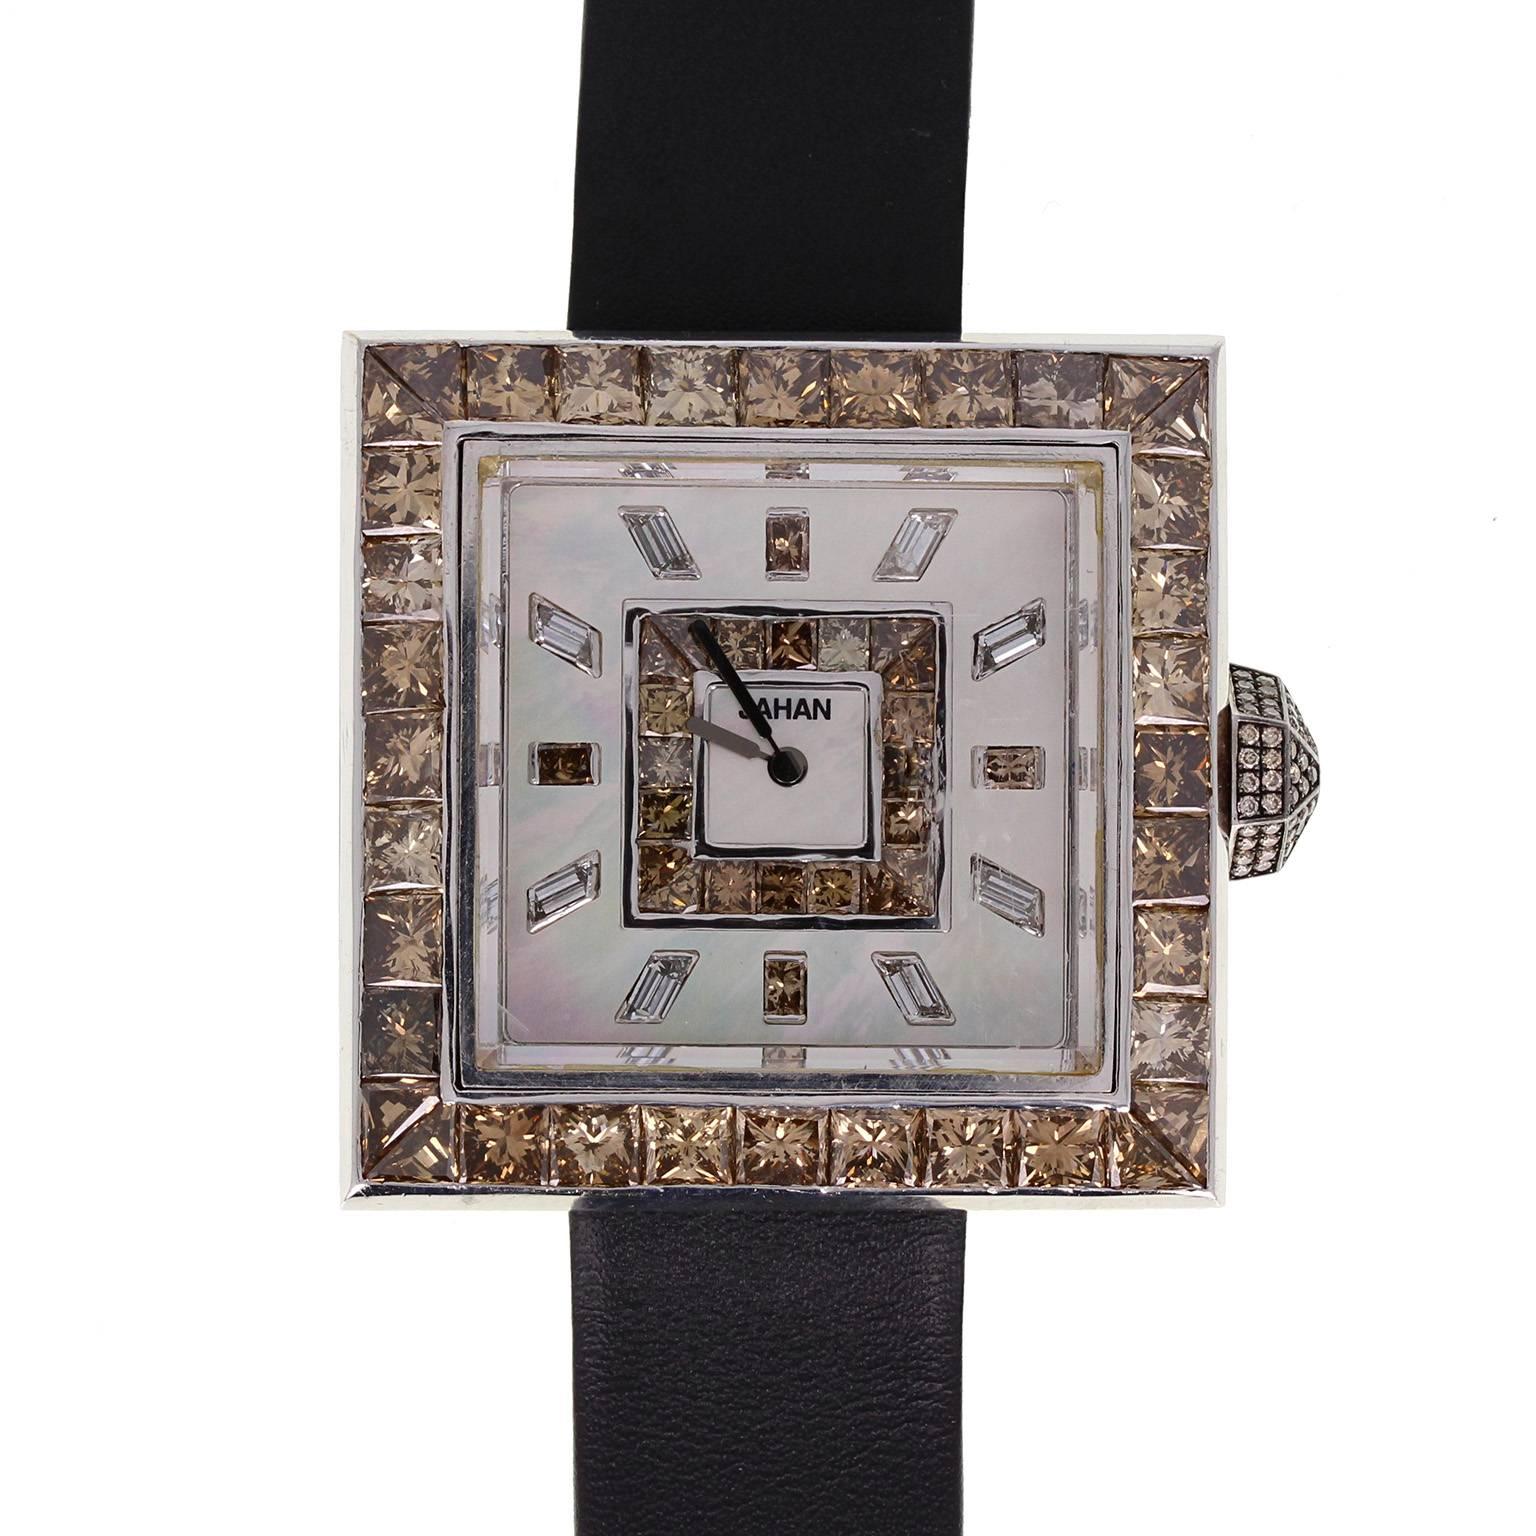 A fine and impressive diamond set watch in 18 carat white gold by Jahan. Mounted with princess-cut cognac diamonds and diamond set winder. Baguette-cut diamond index. Limited edition and numbered 001. Leather buckle strap.
 
Case
Tests as 18